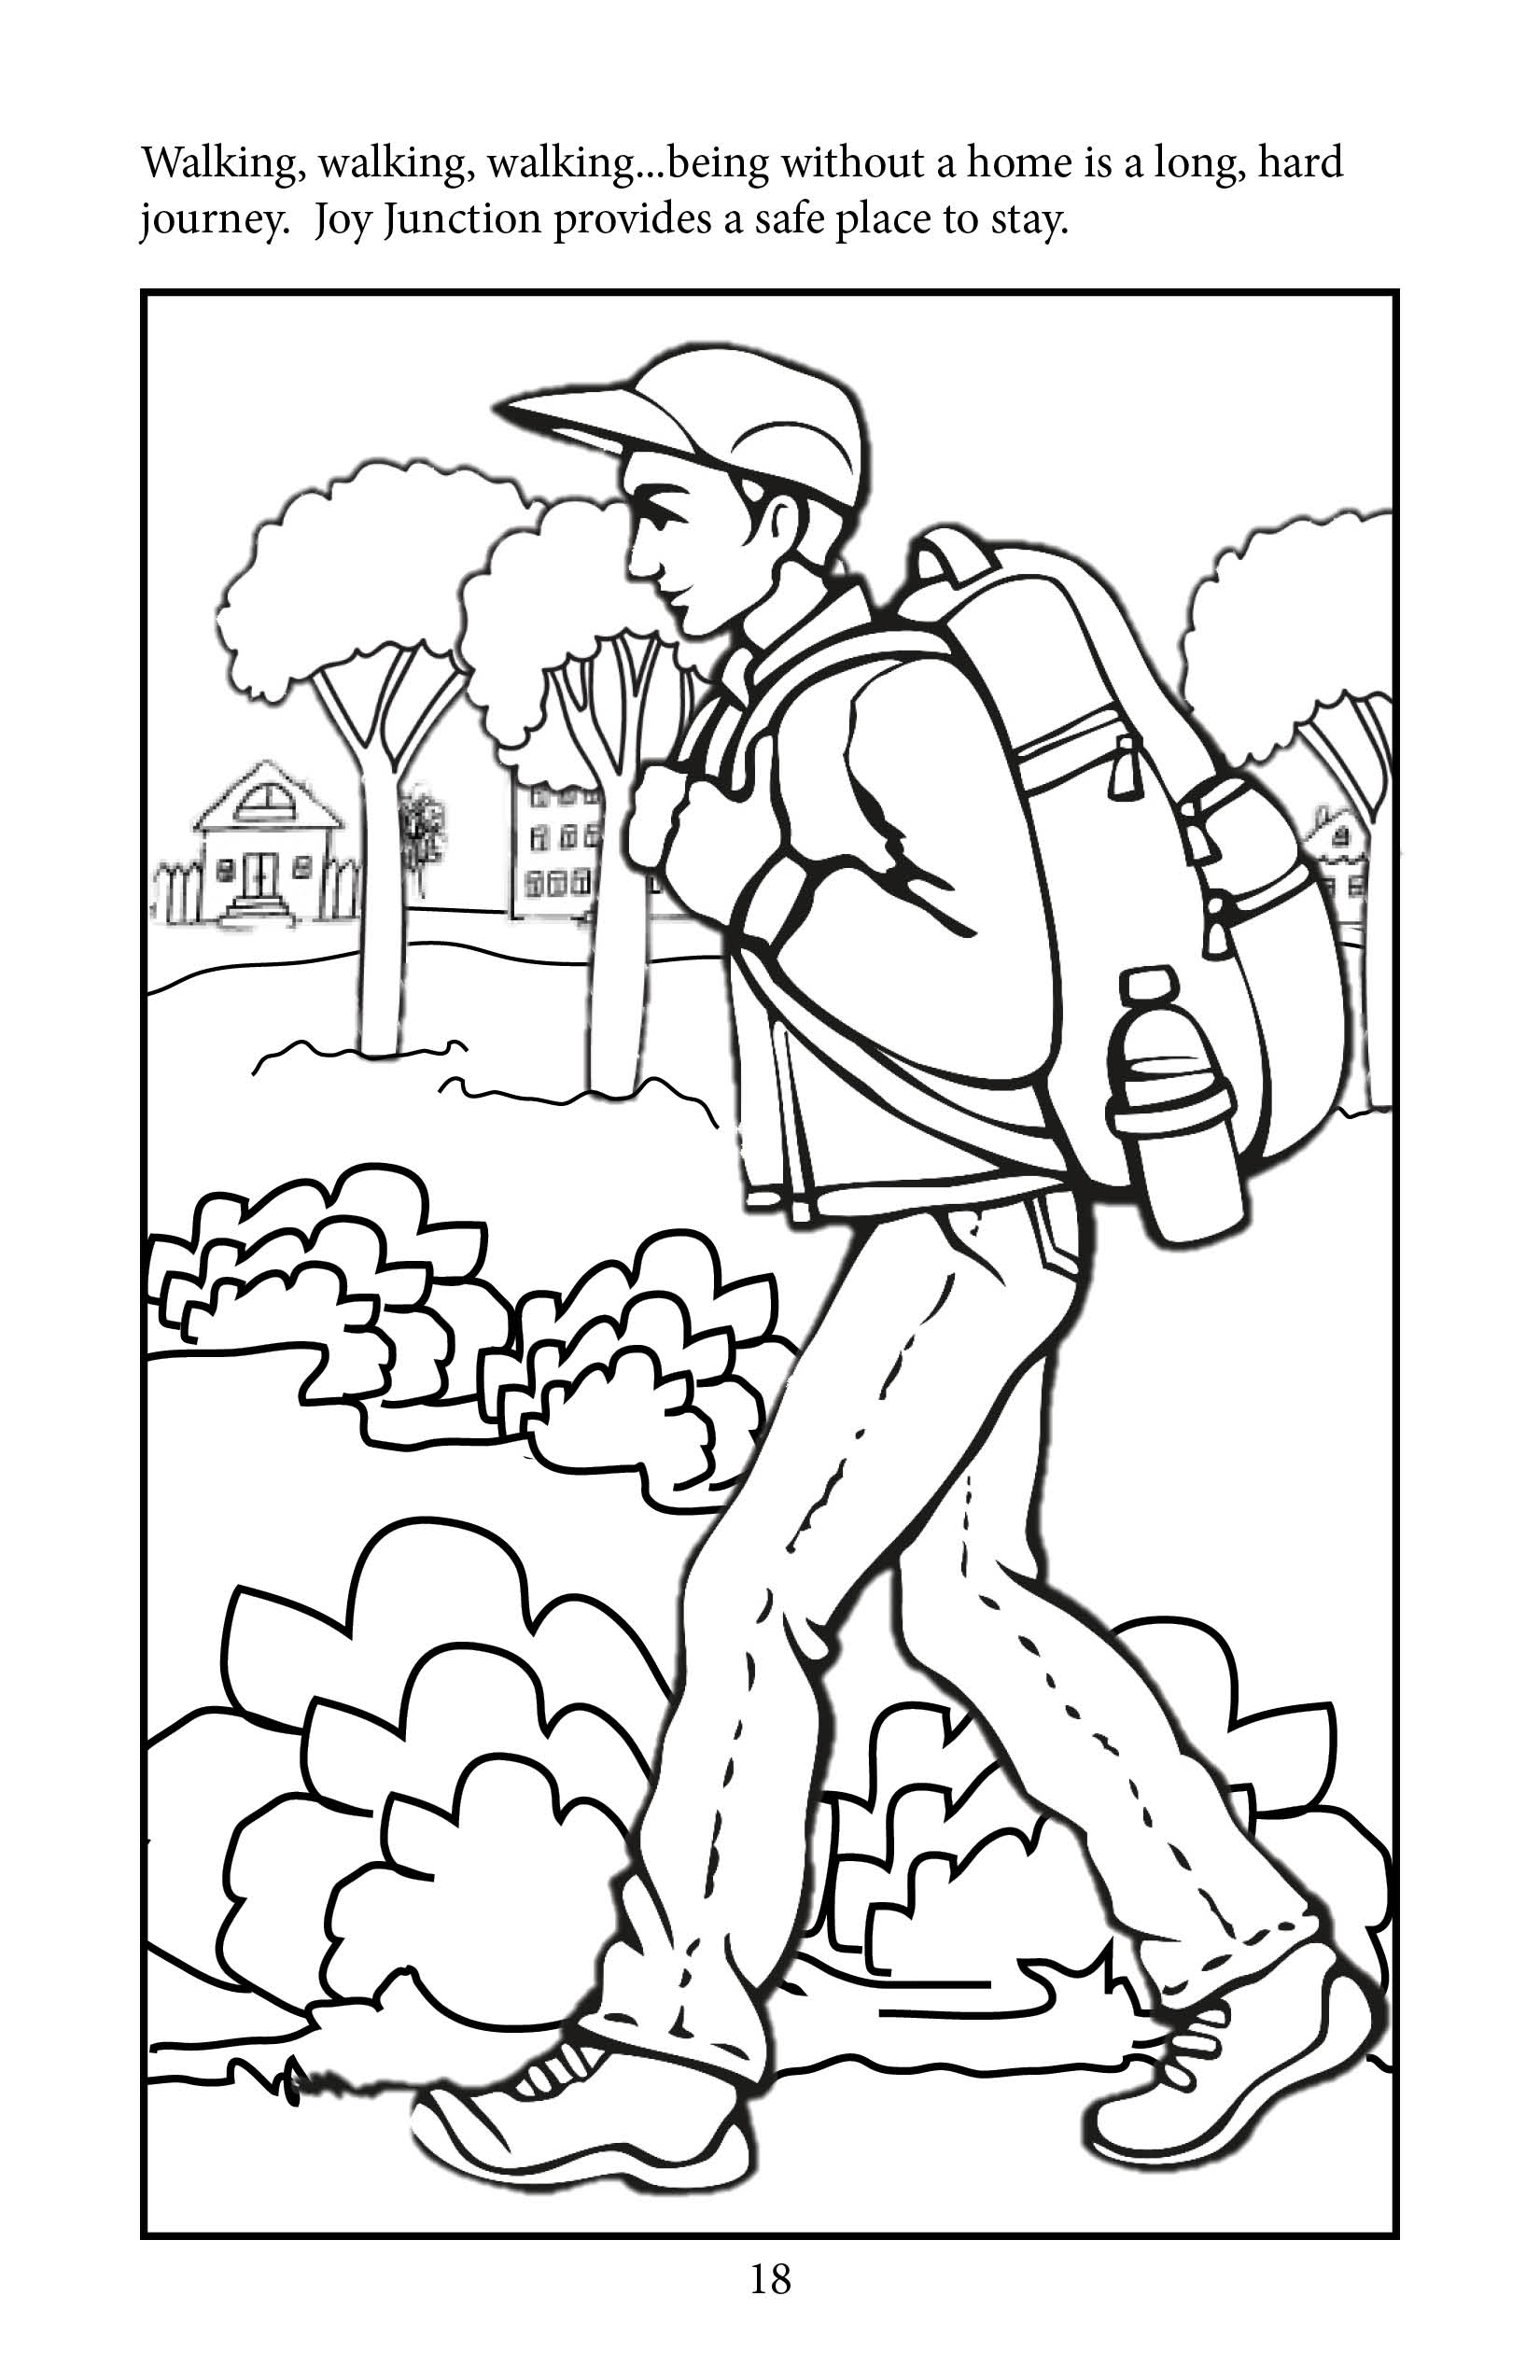 Joy Junction Coloring Book Page 18